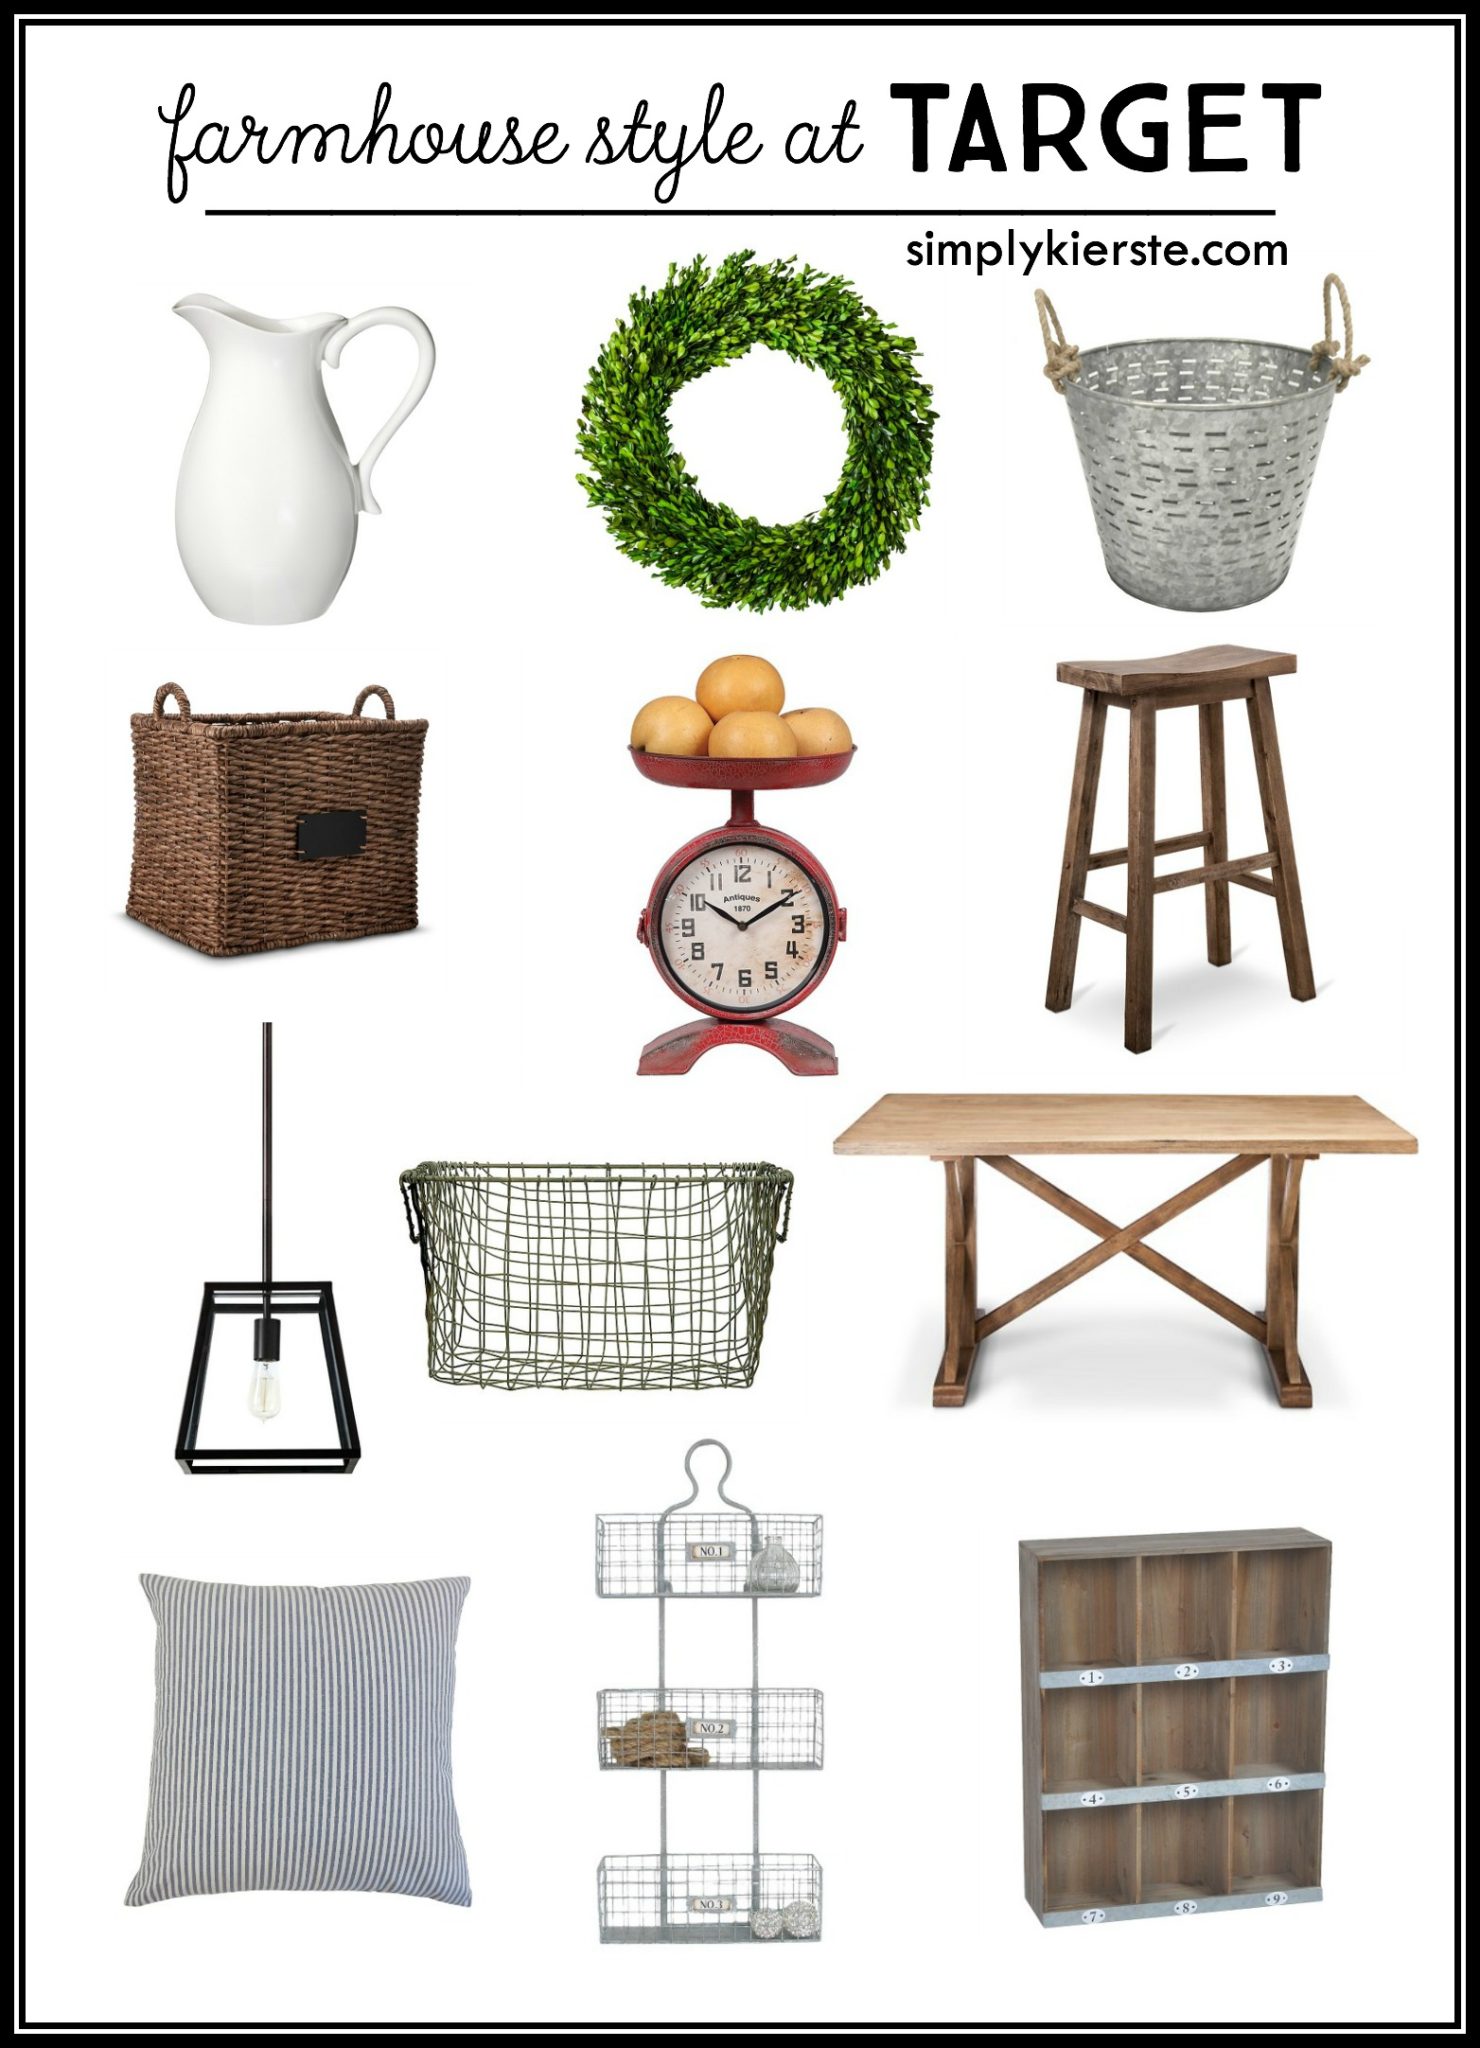 Finding Farmhouse style at Target!